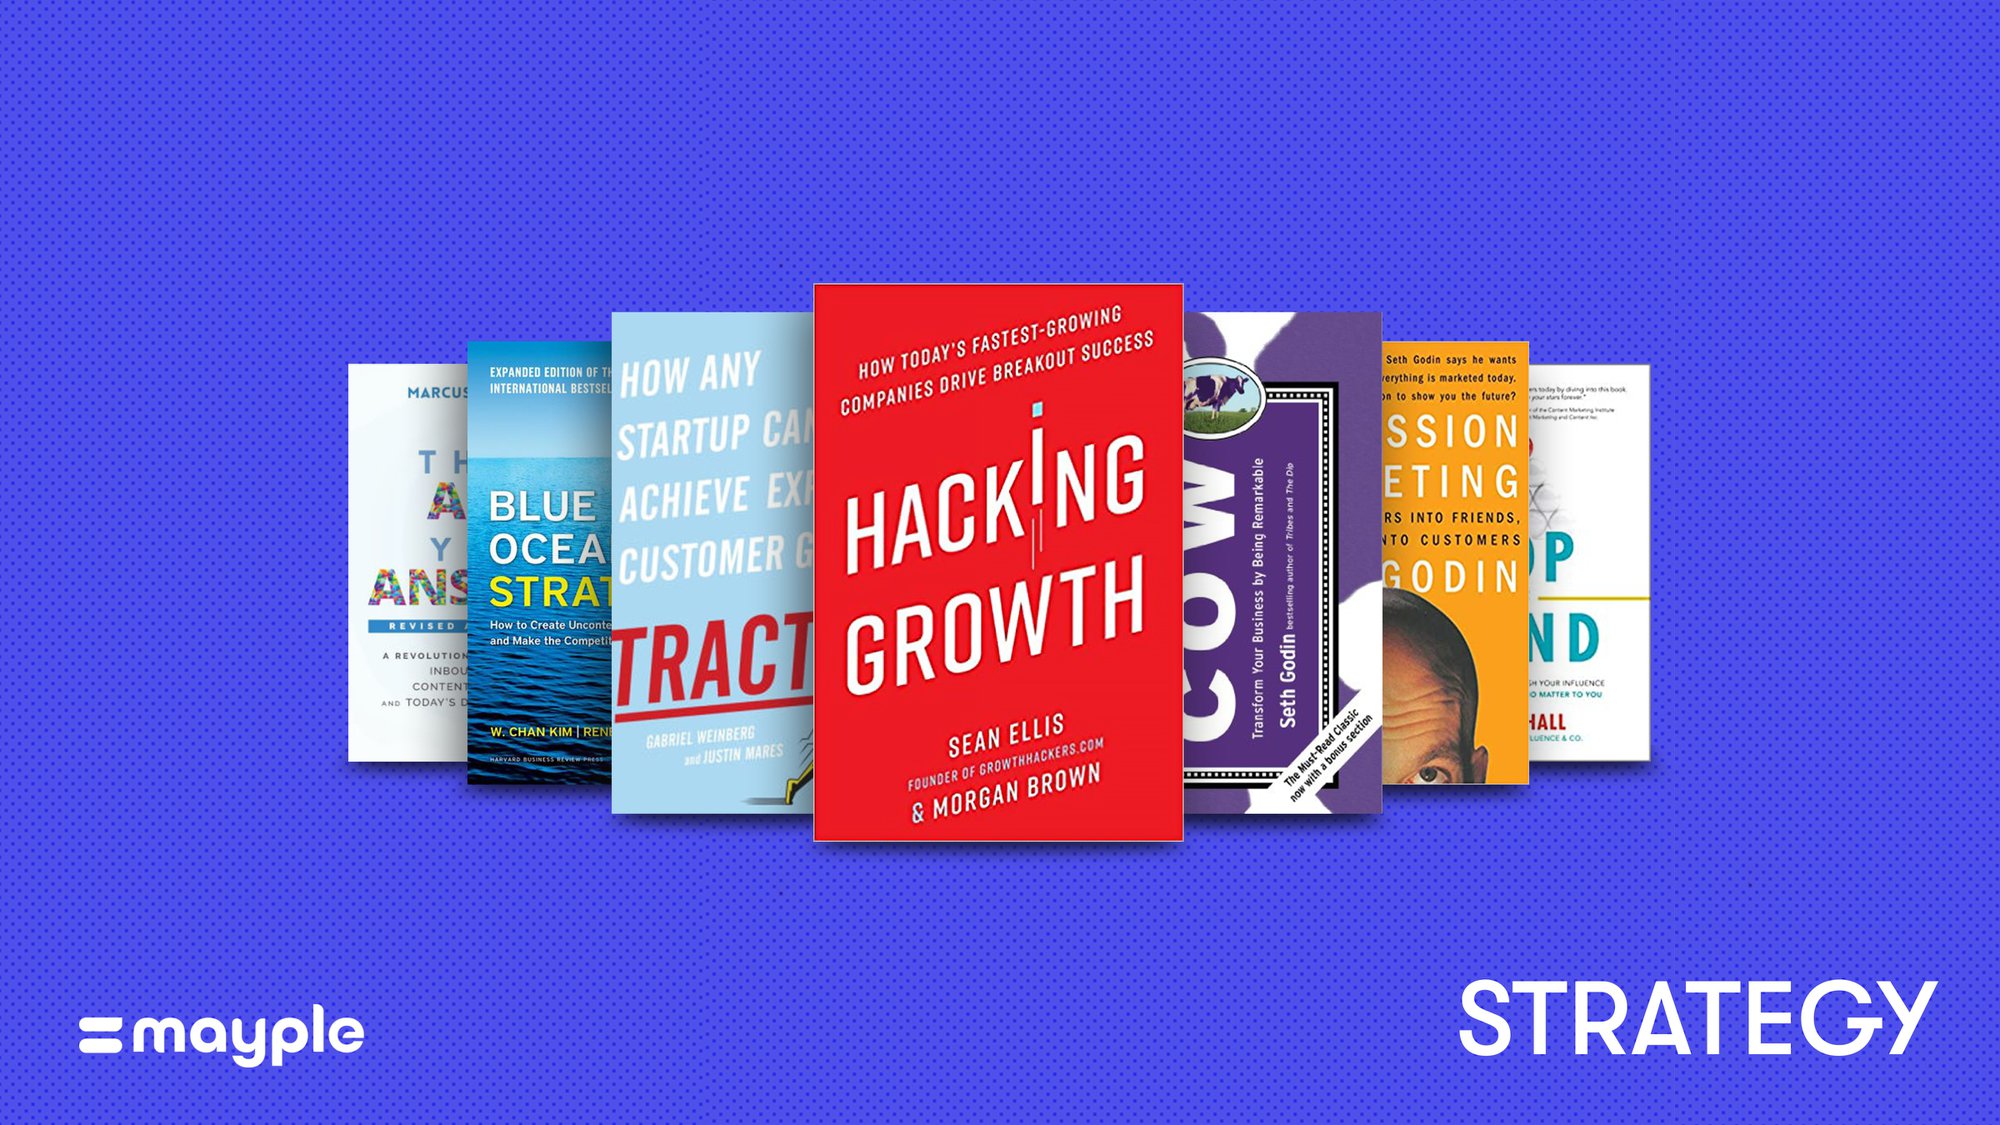 SHOP TALK: Cool tools, great books and news you can use